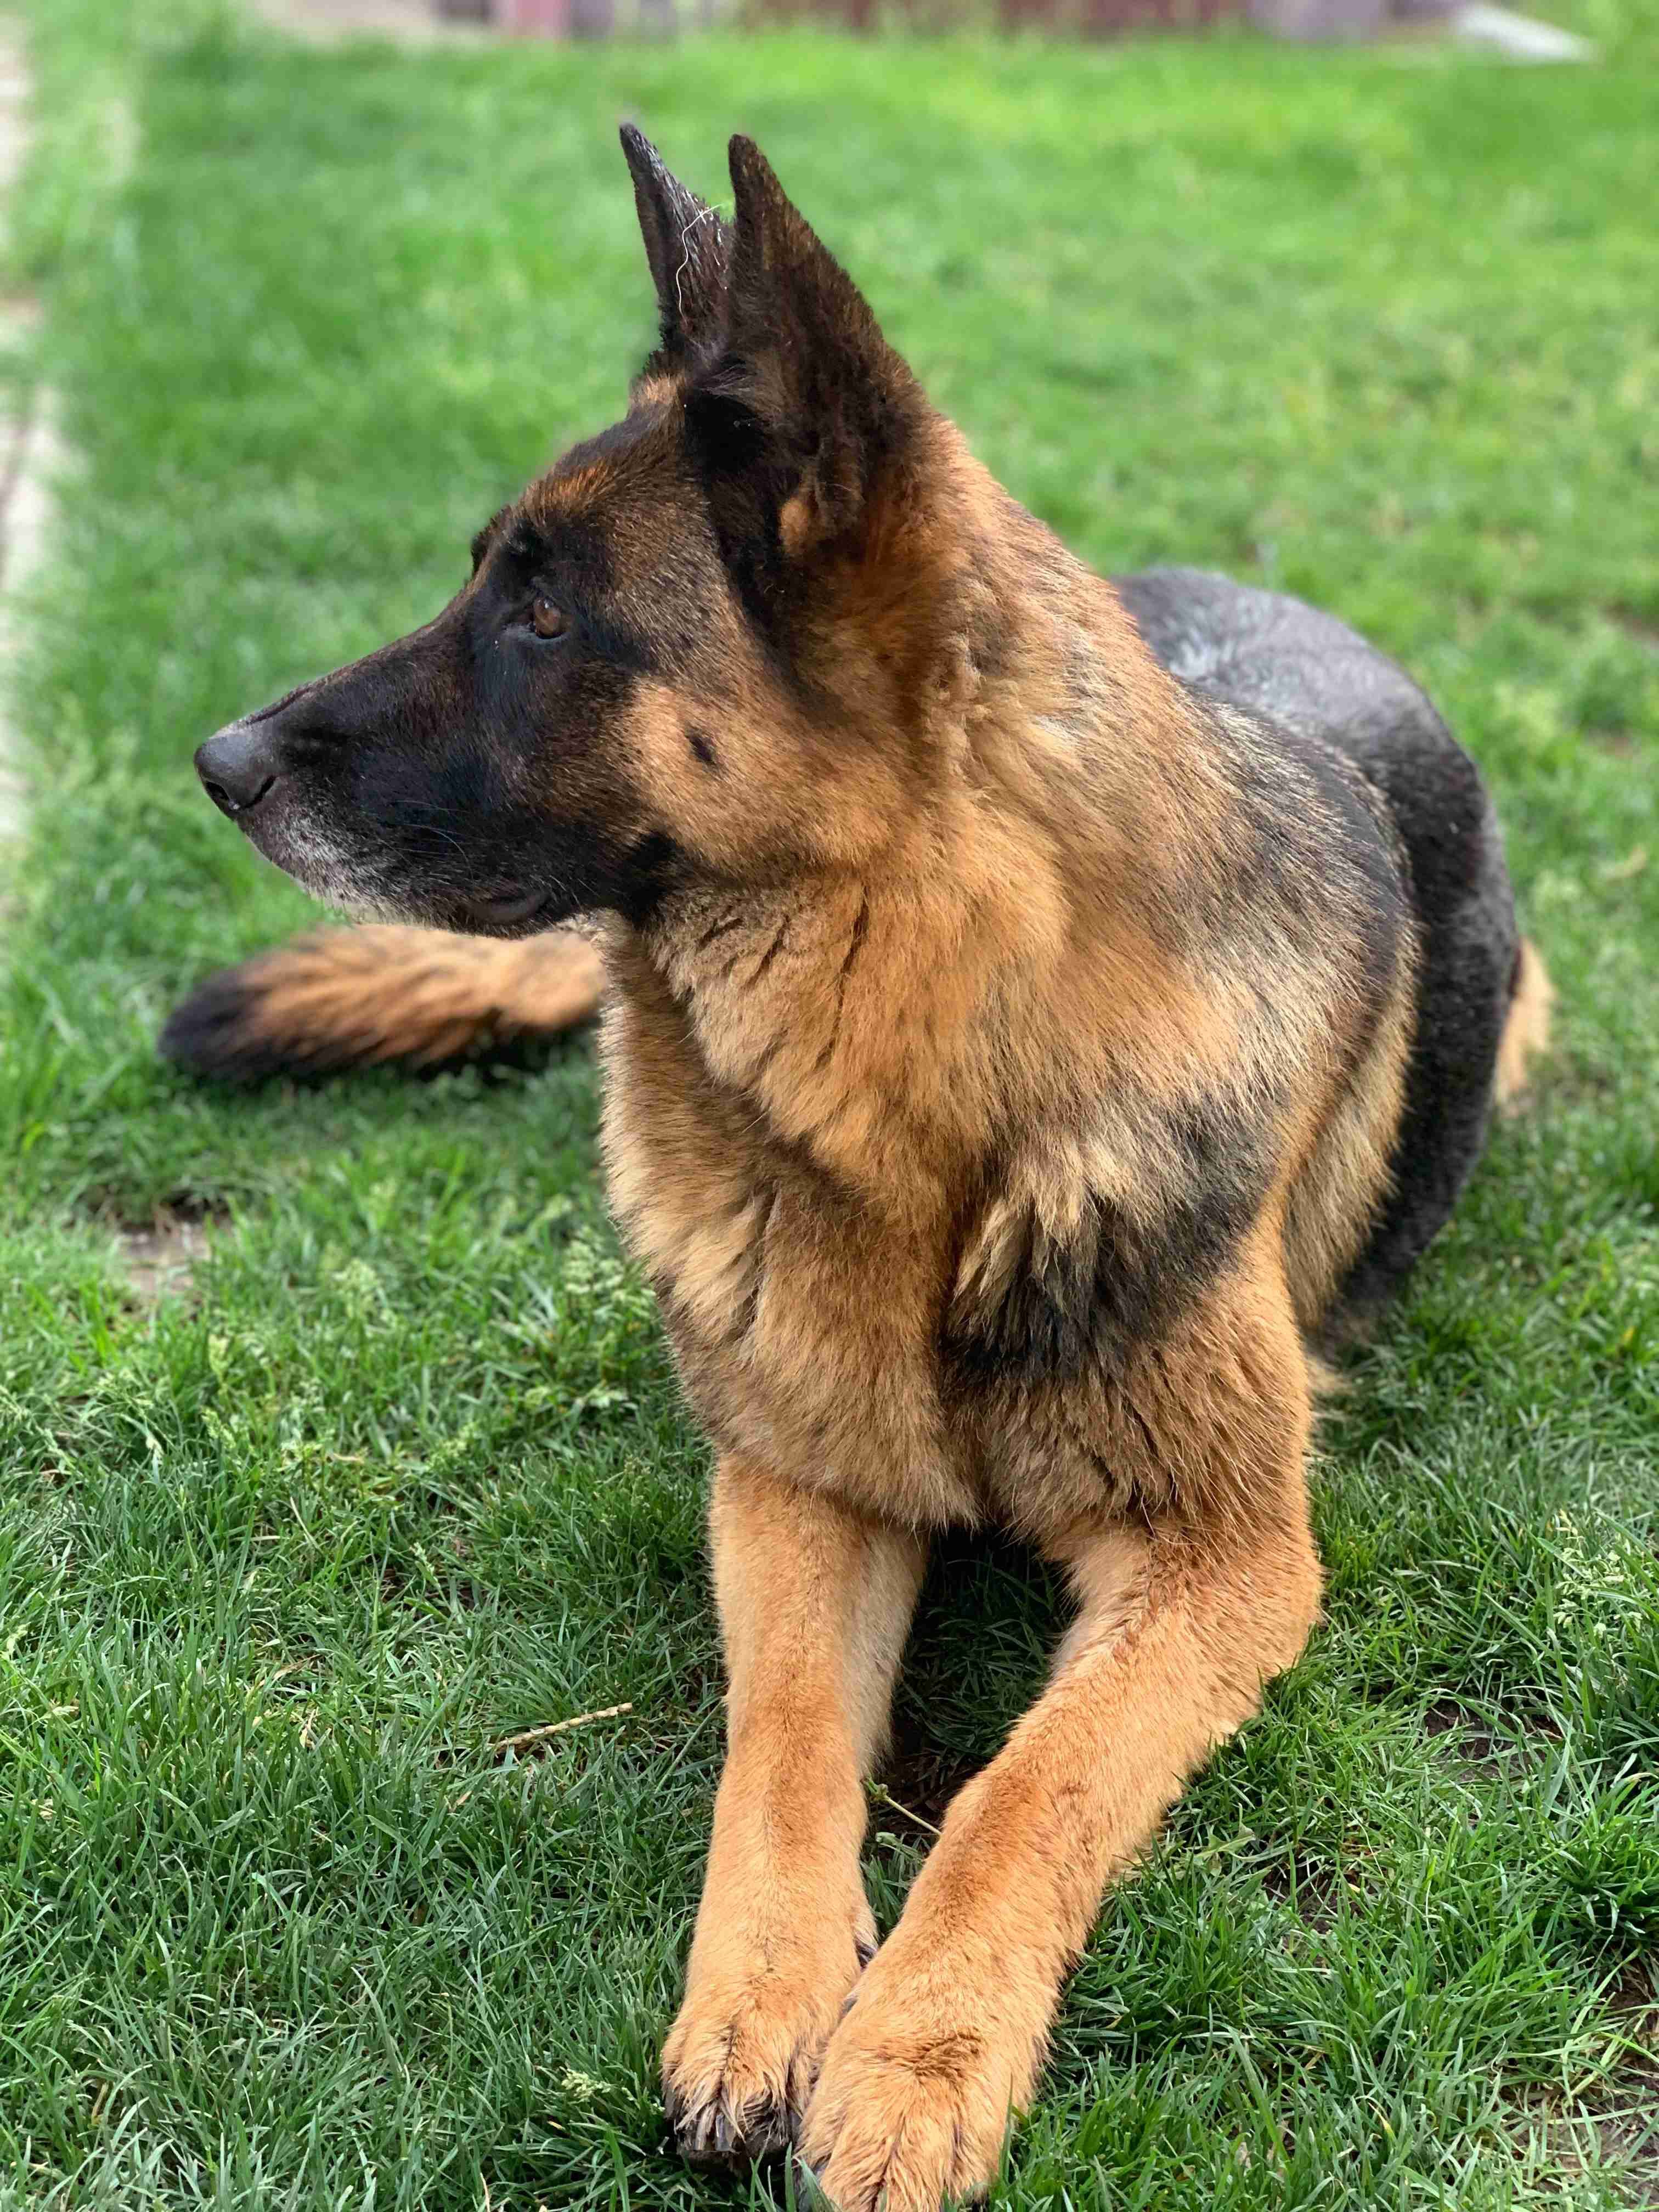 What kind of medical care is necessary for a German shepherd?